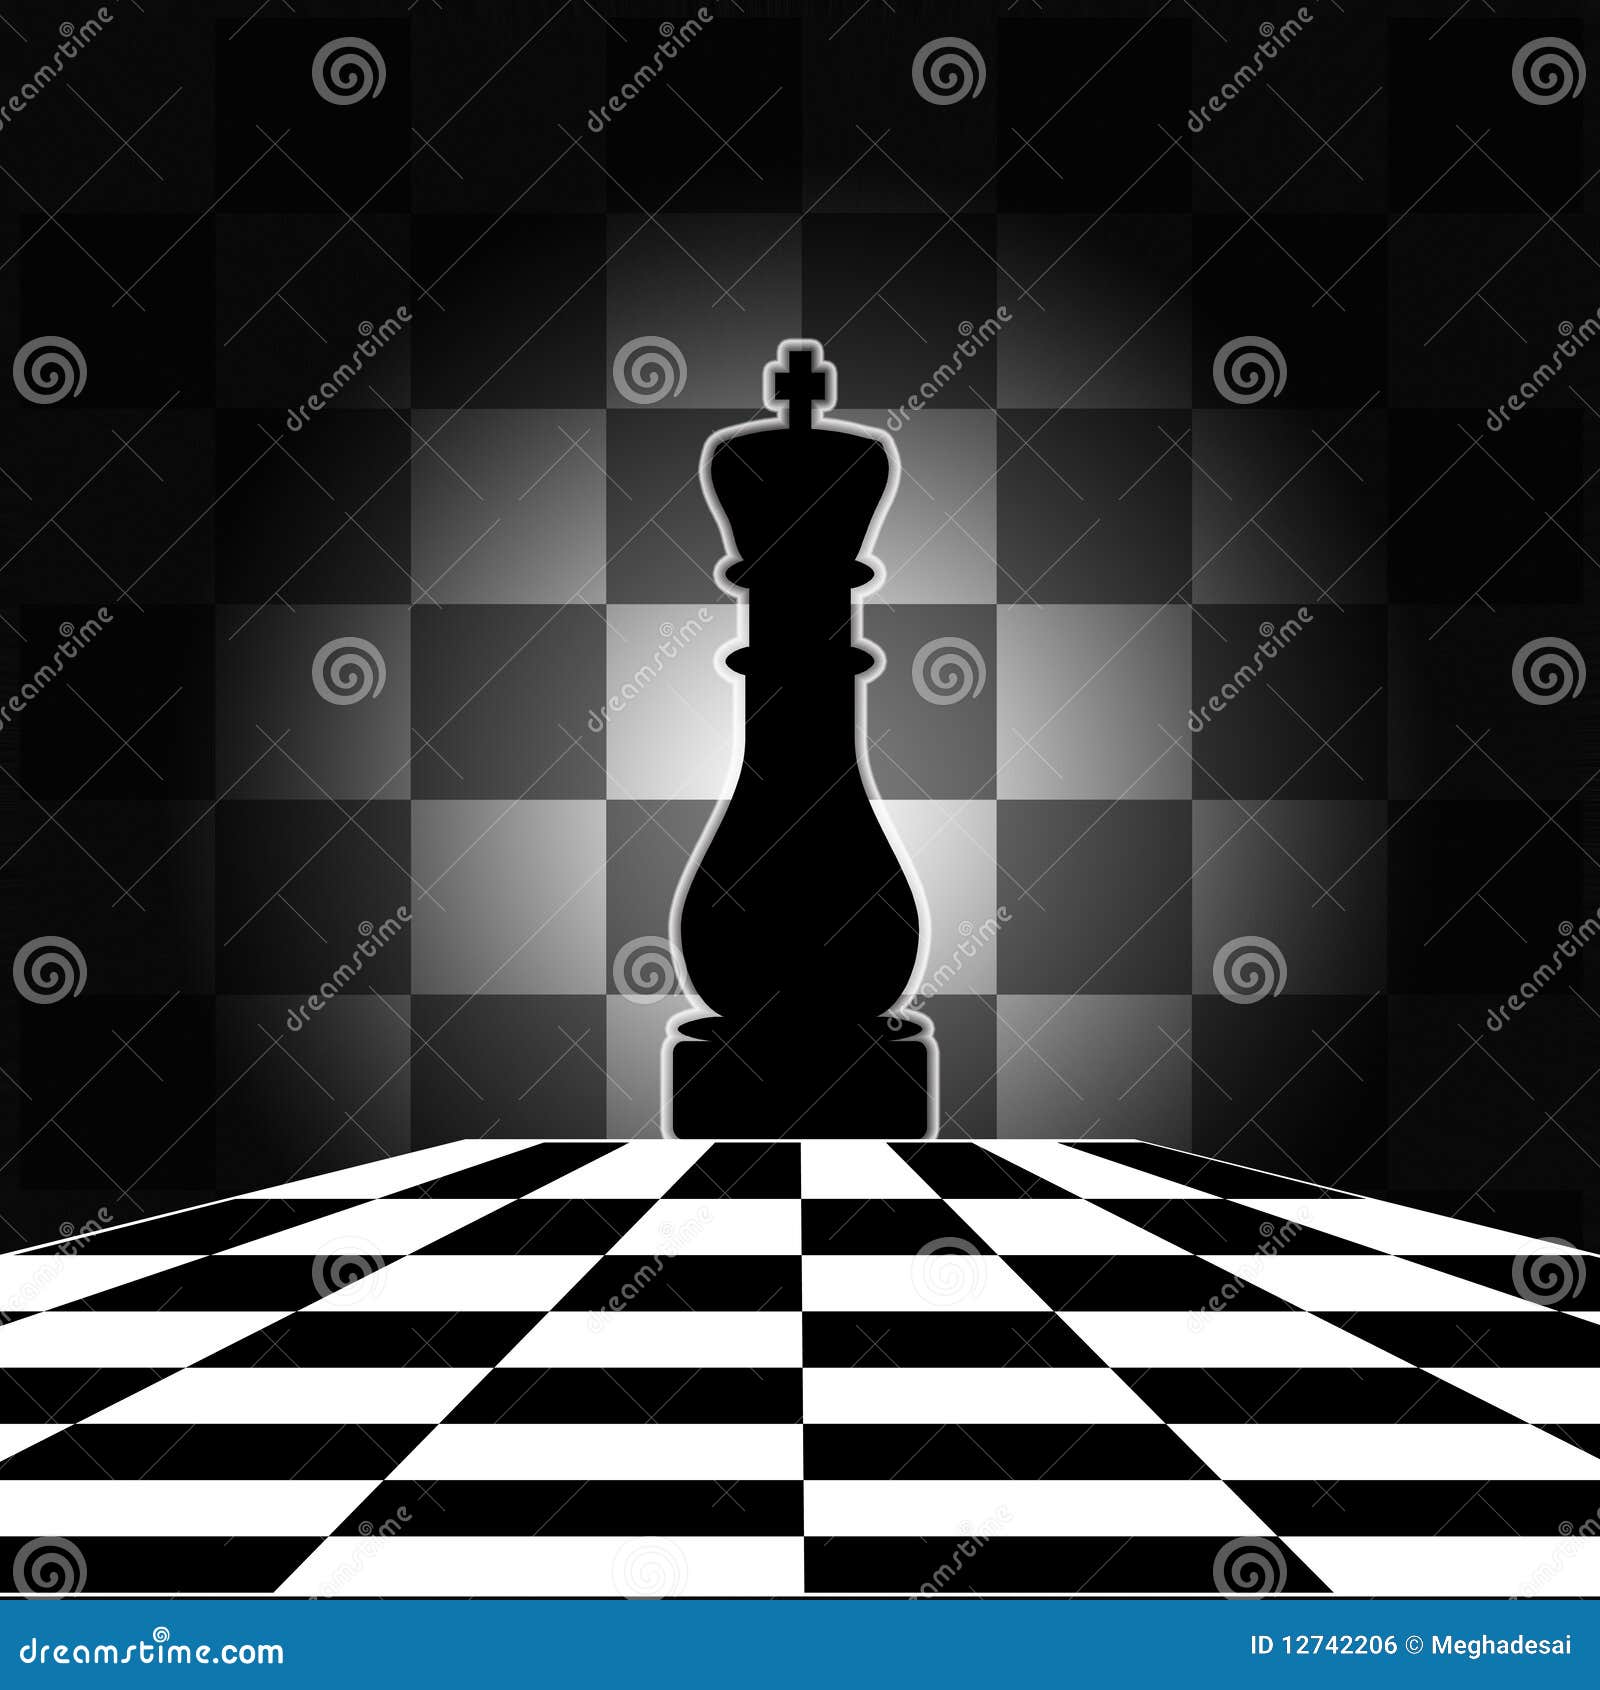 Chess board with king is created with the help of photoshop and 